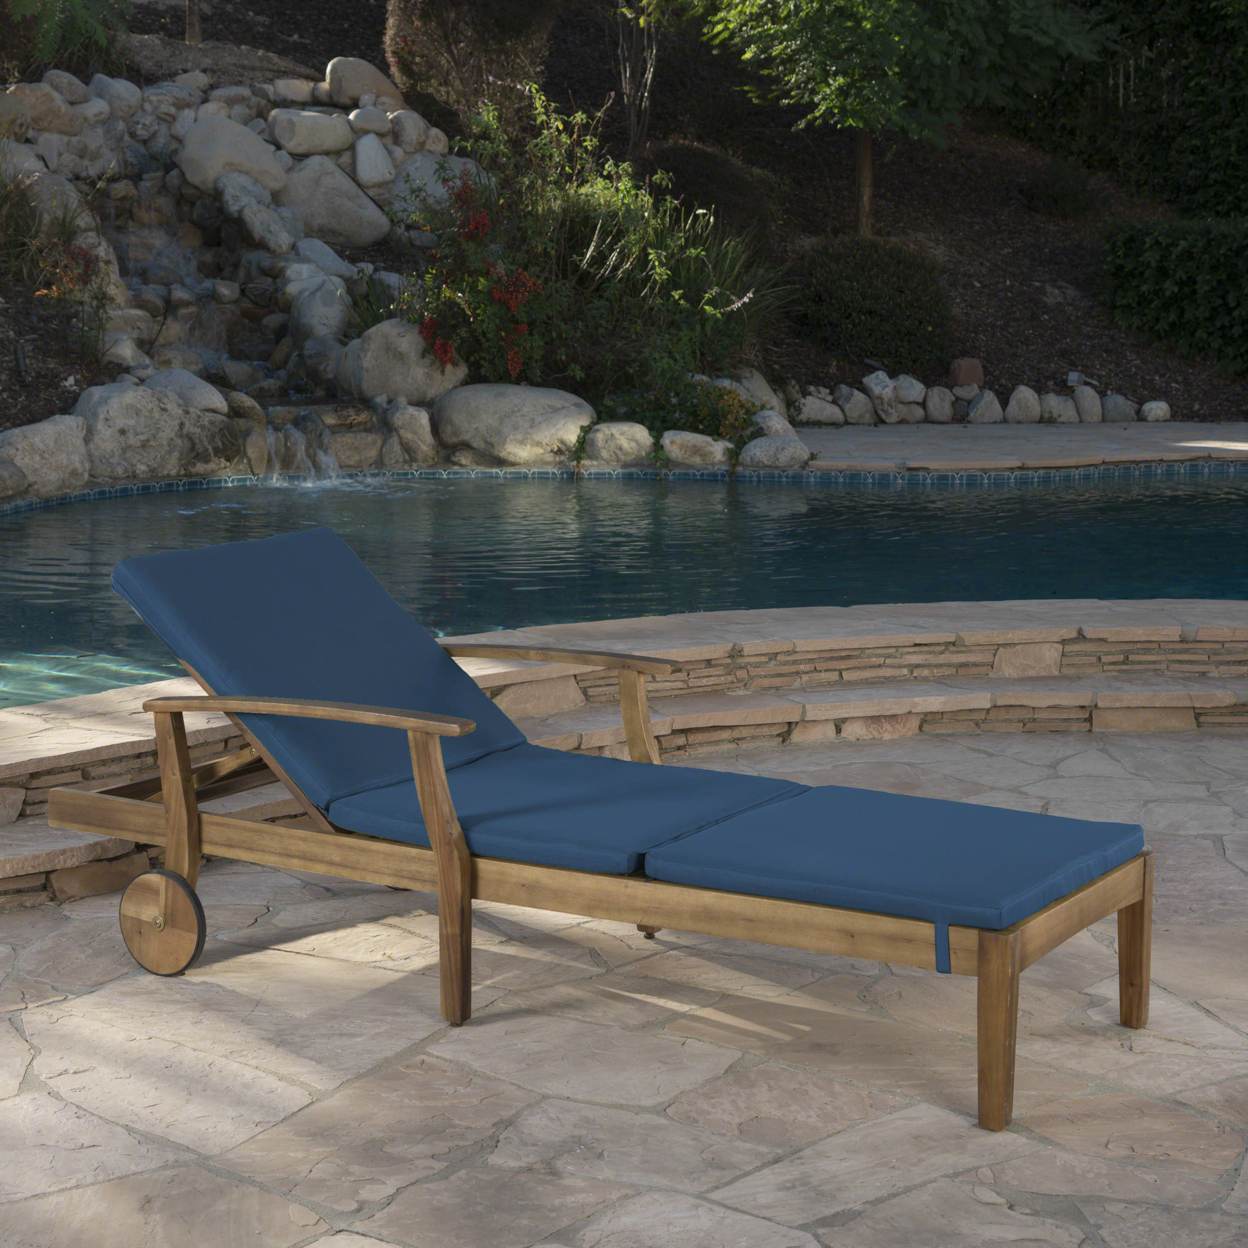 Daisy Outdoor Teak Finish Chaise Lounge With Water Resistant Cushion - Blue, Single